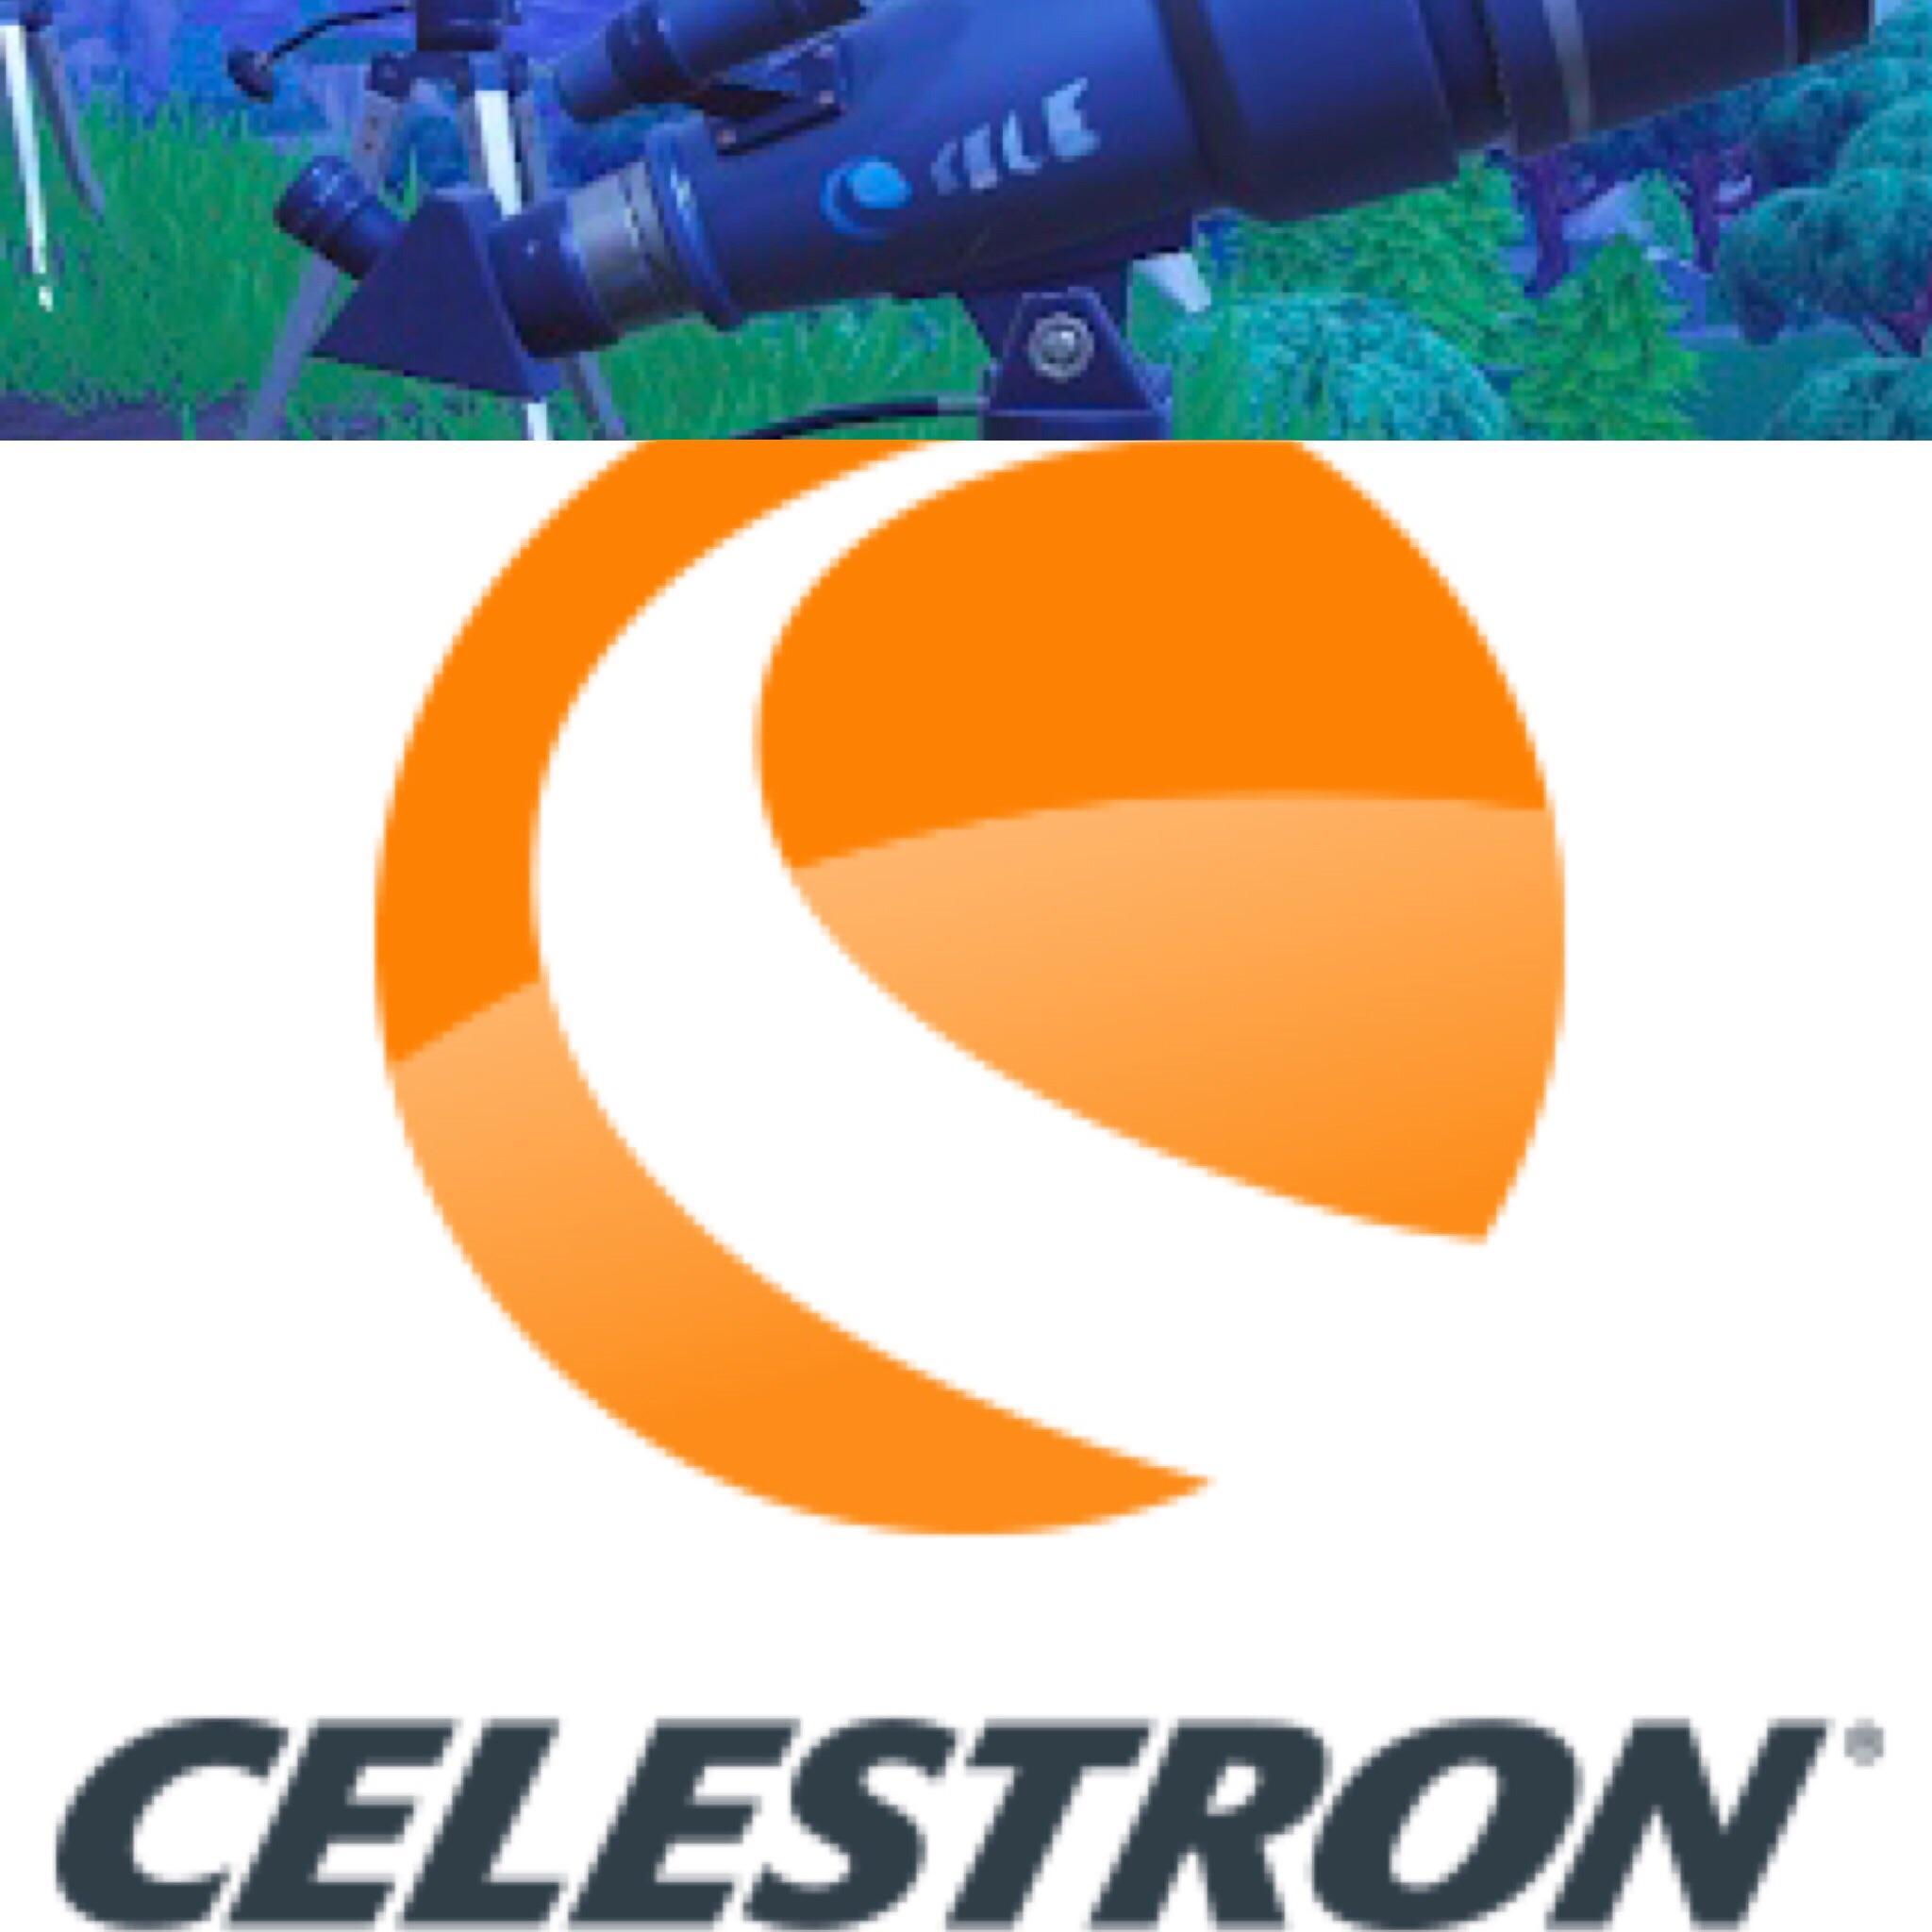 Celestron Logo - NEW EVIDENCE FOR COMIG IN FORTNITE !!!!!!!!I found that the logo